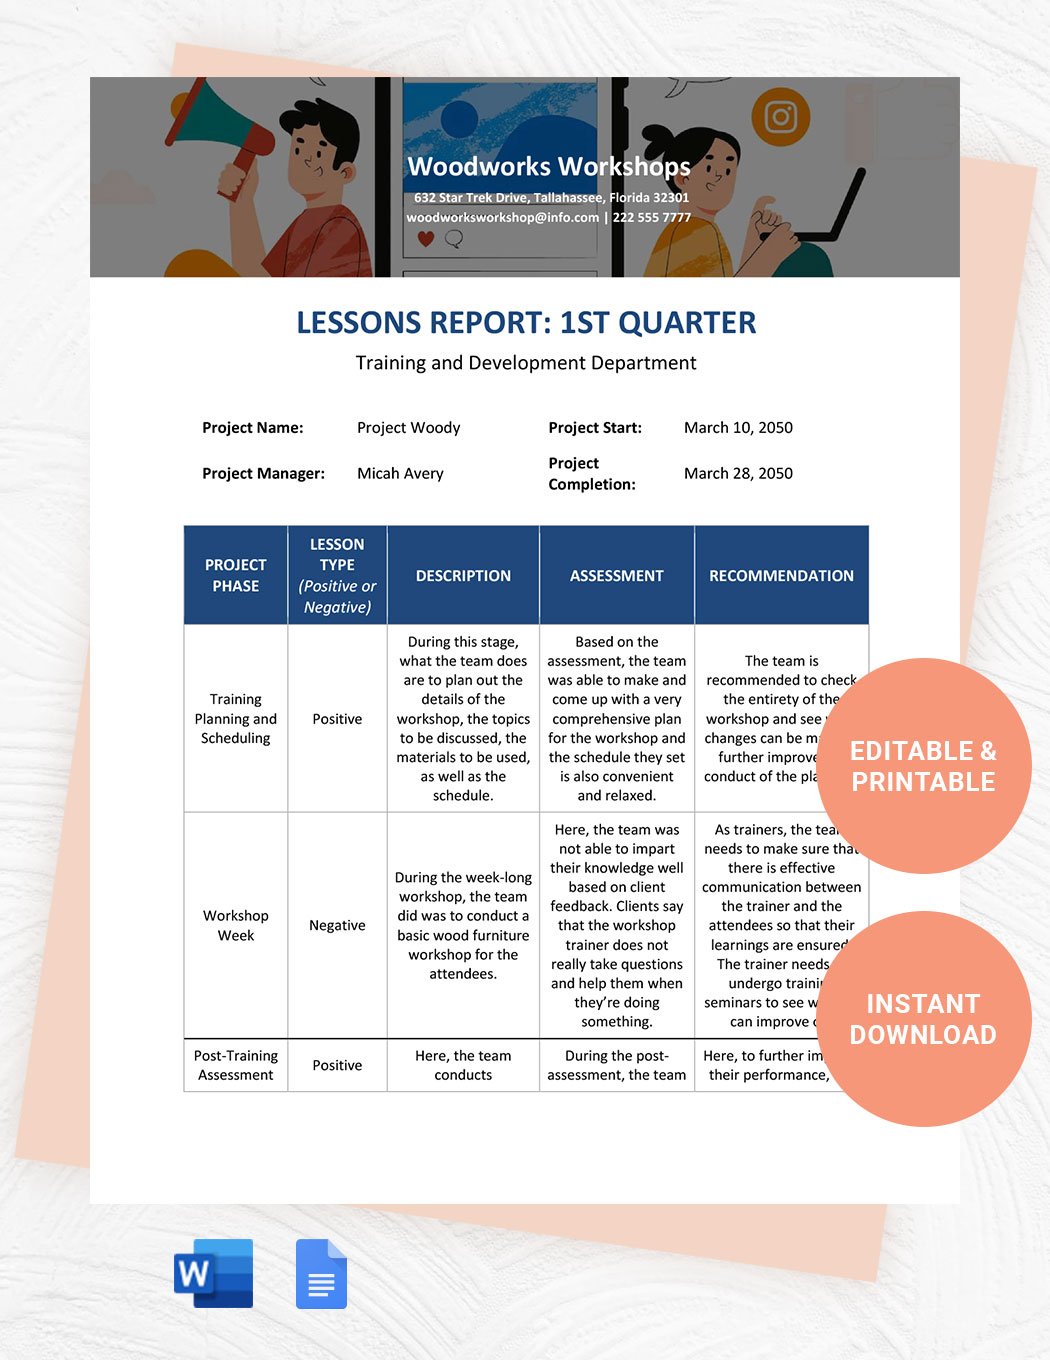 Workshop Lessons Learned Template in Word, Google Docs